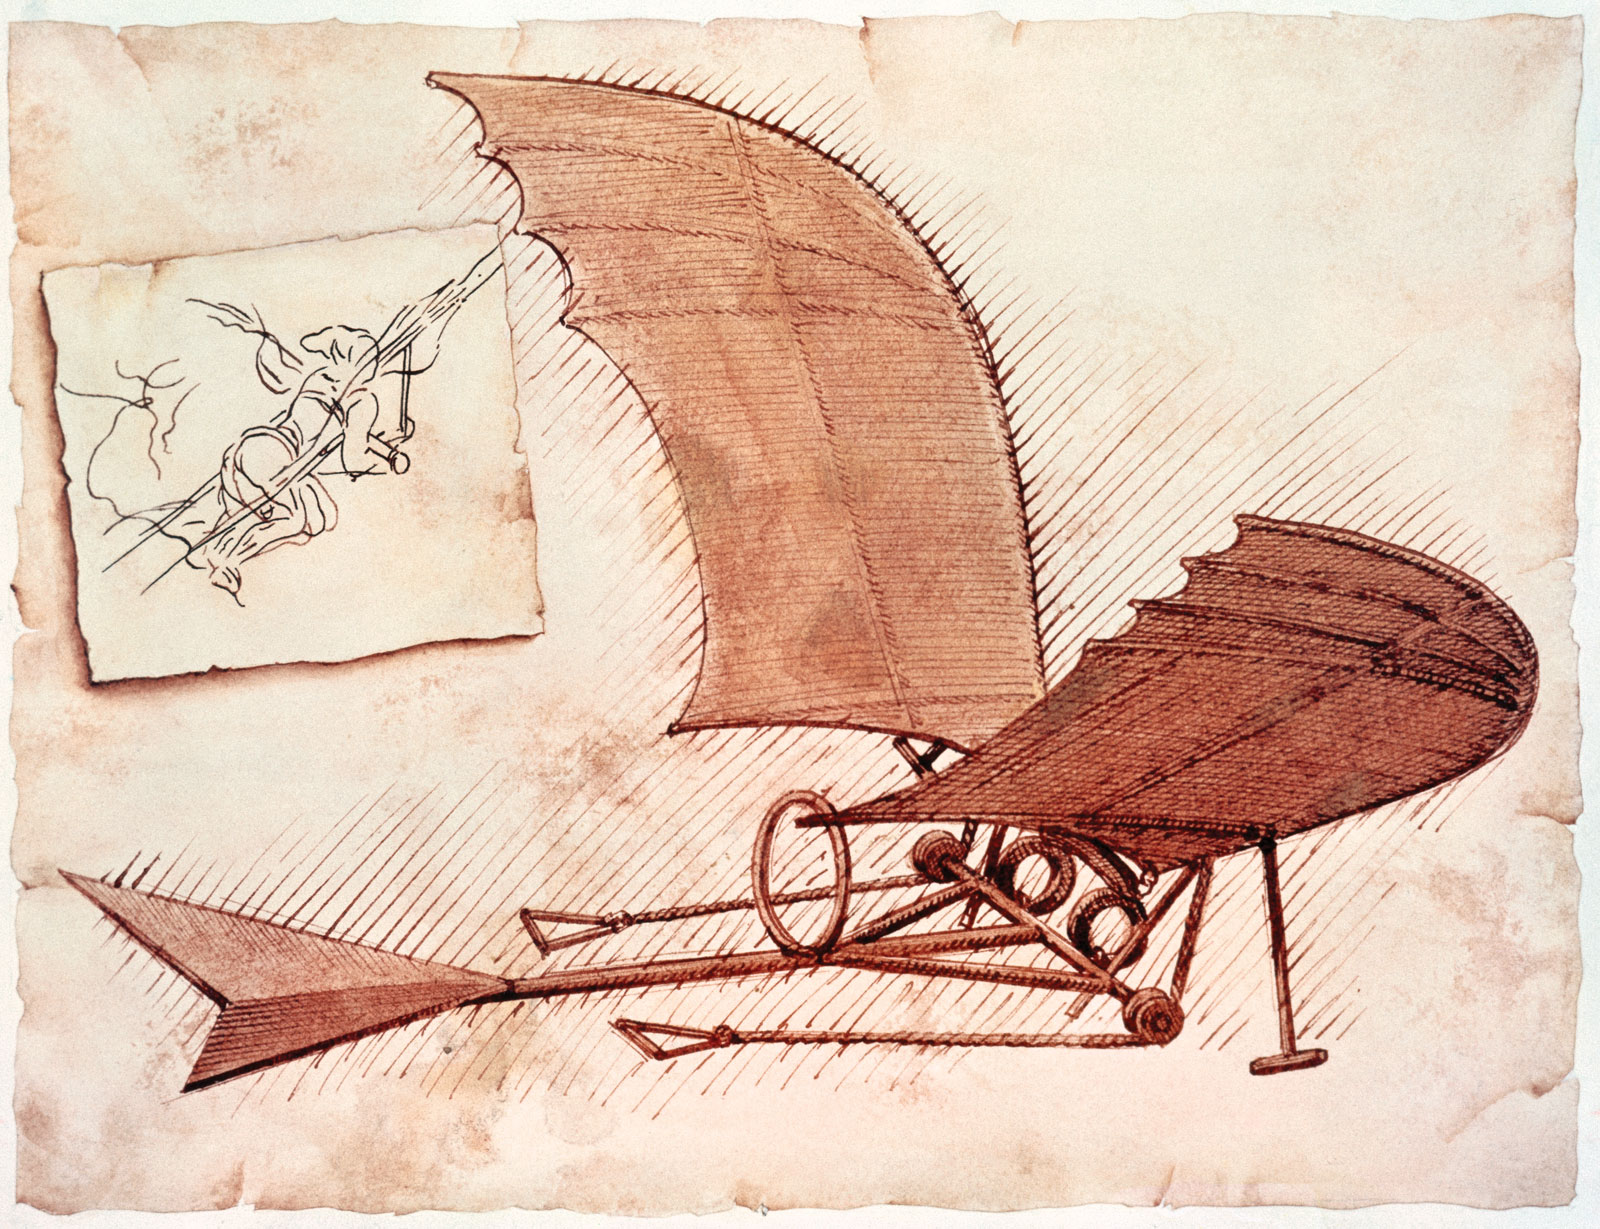 The Ornithopter